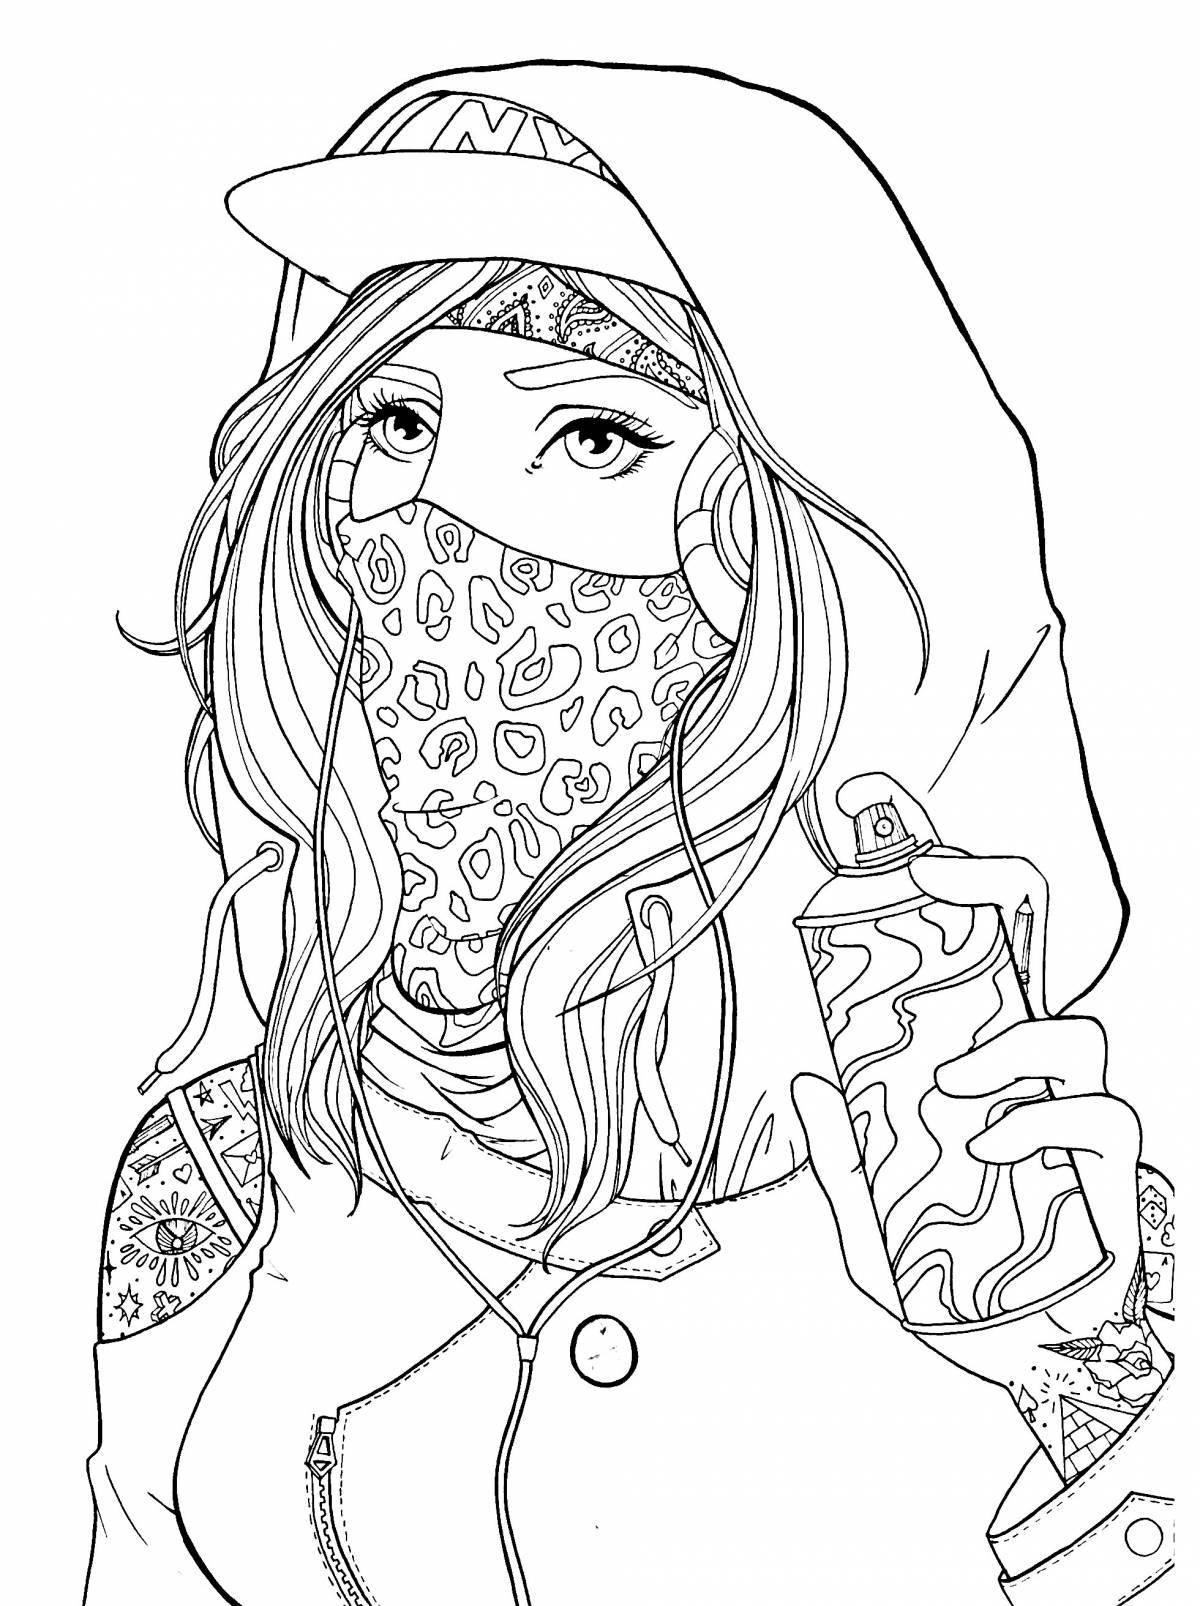 Color-brilliant coloring page for girls 20 years old